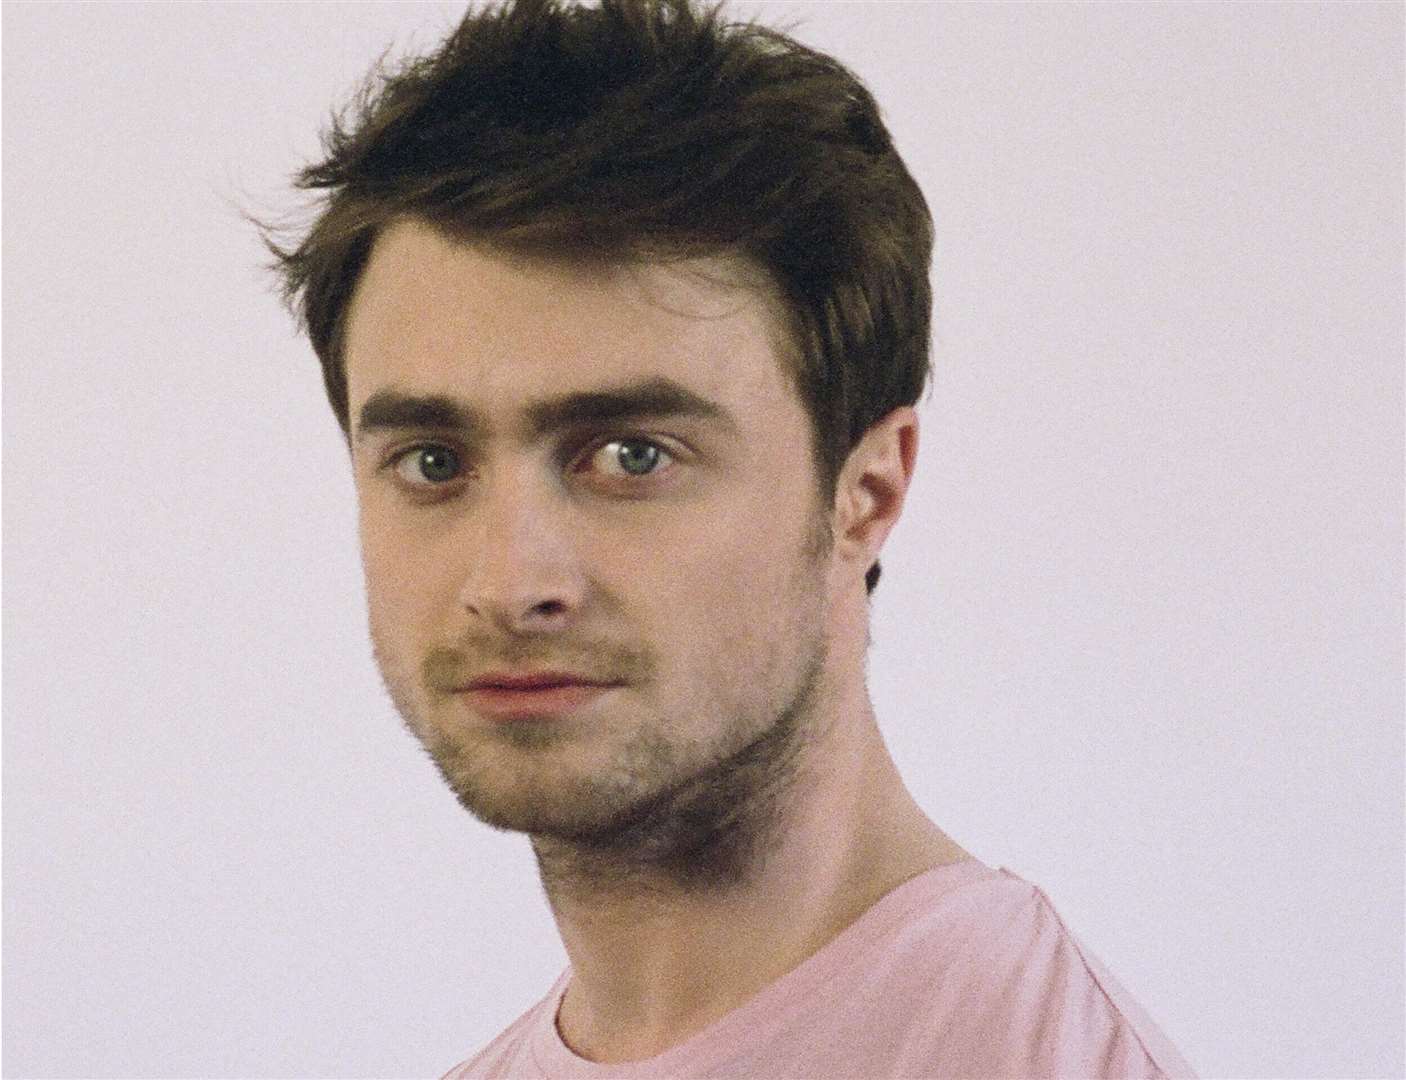 Harry Potter star Daniel Radcliffe is helping to raise money for children with serious or terminal conditions this Christmas